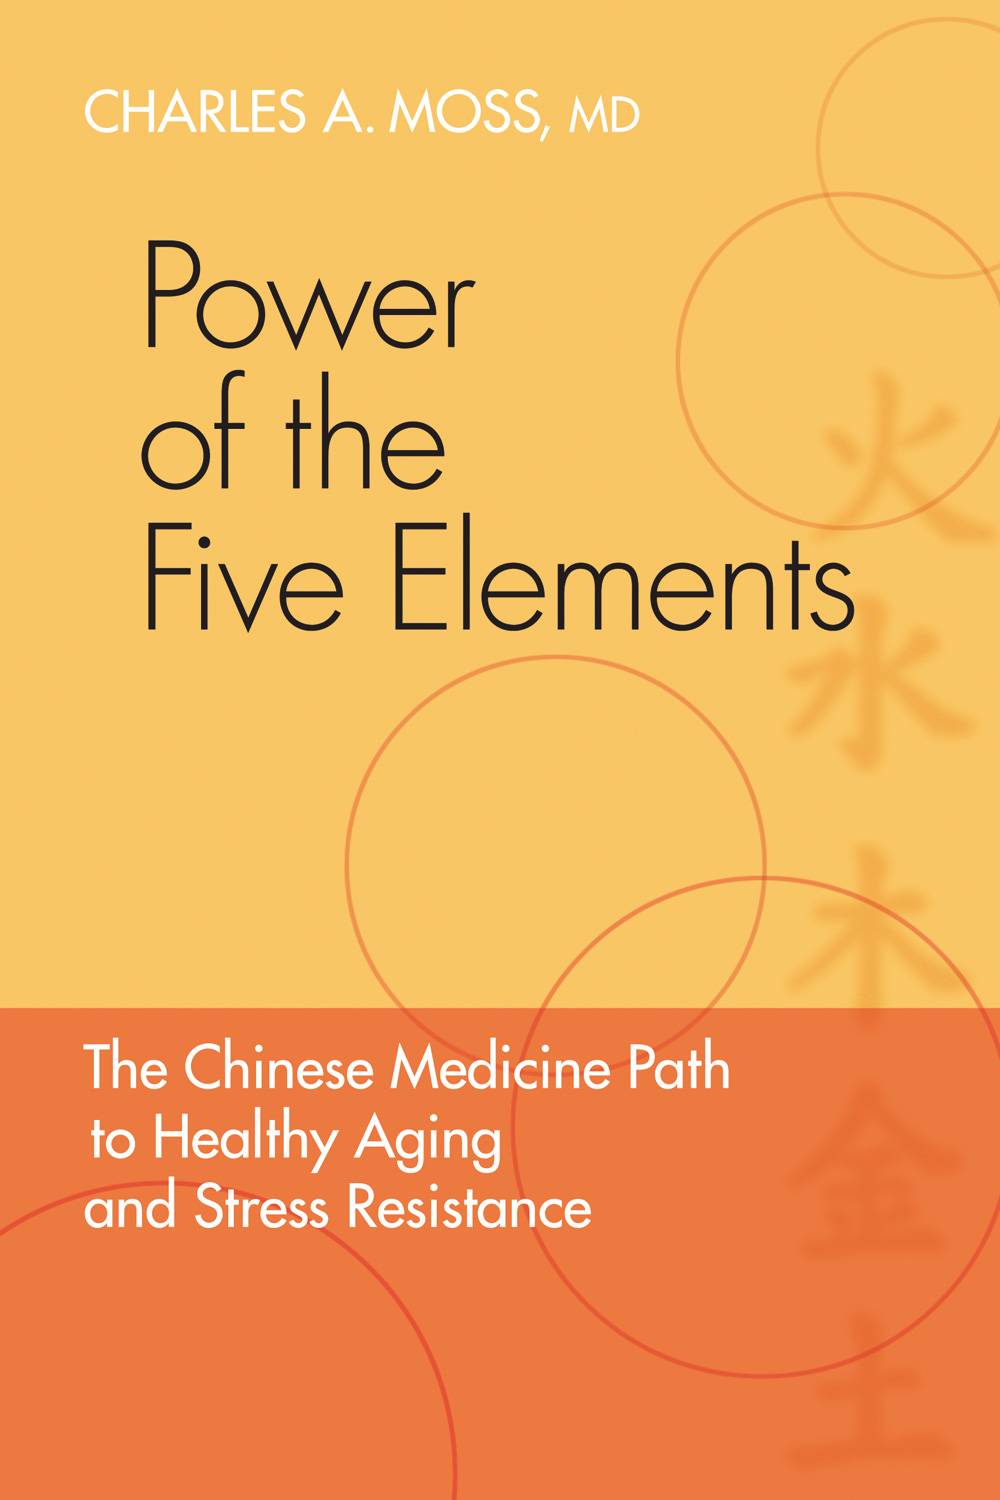 Power of the five elements - the chinese medicine path to healthy aging and